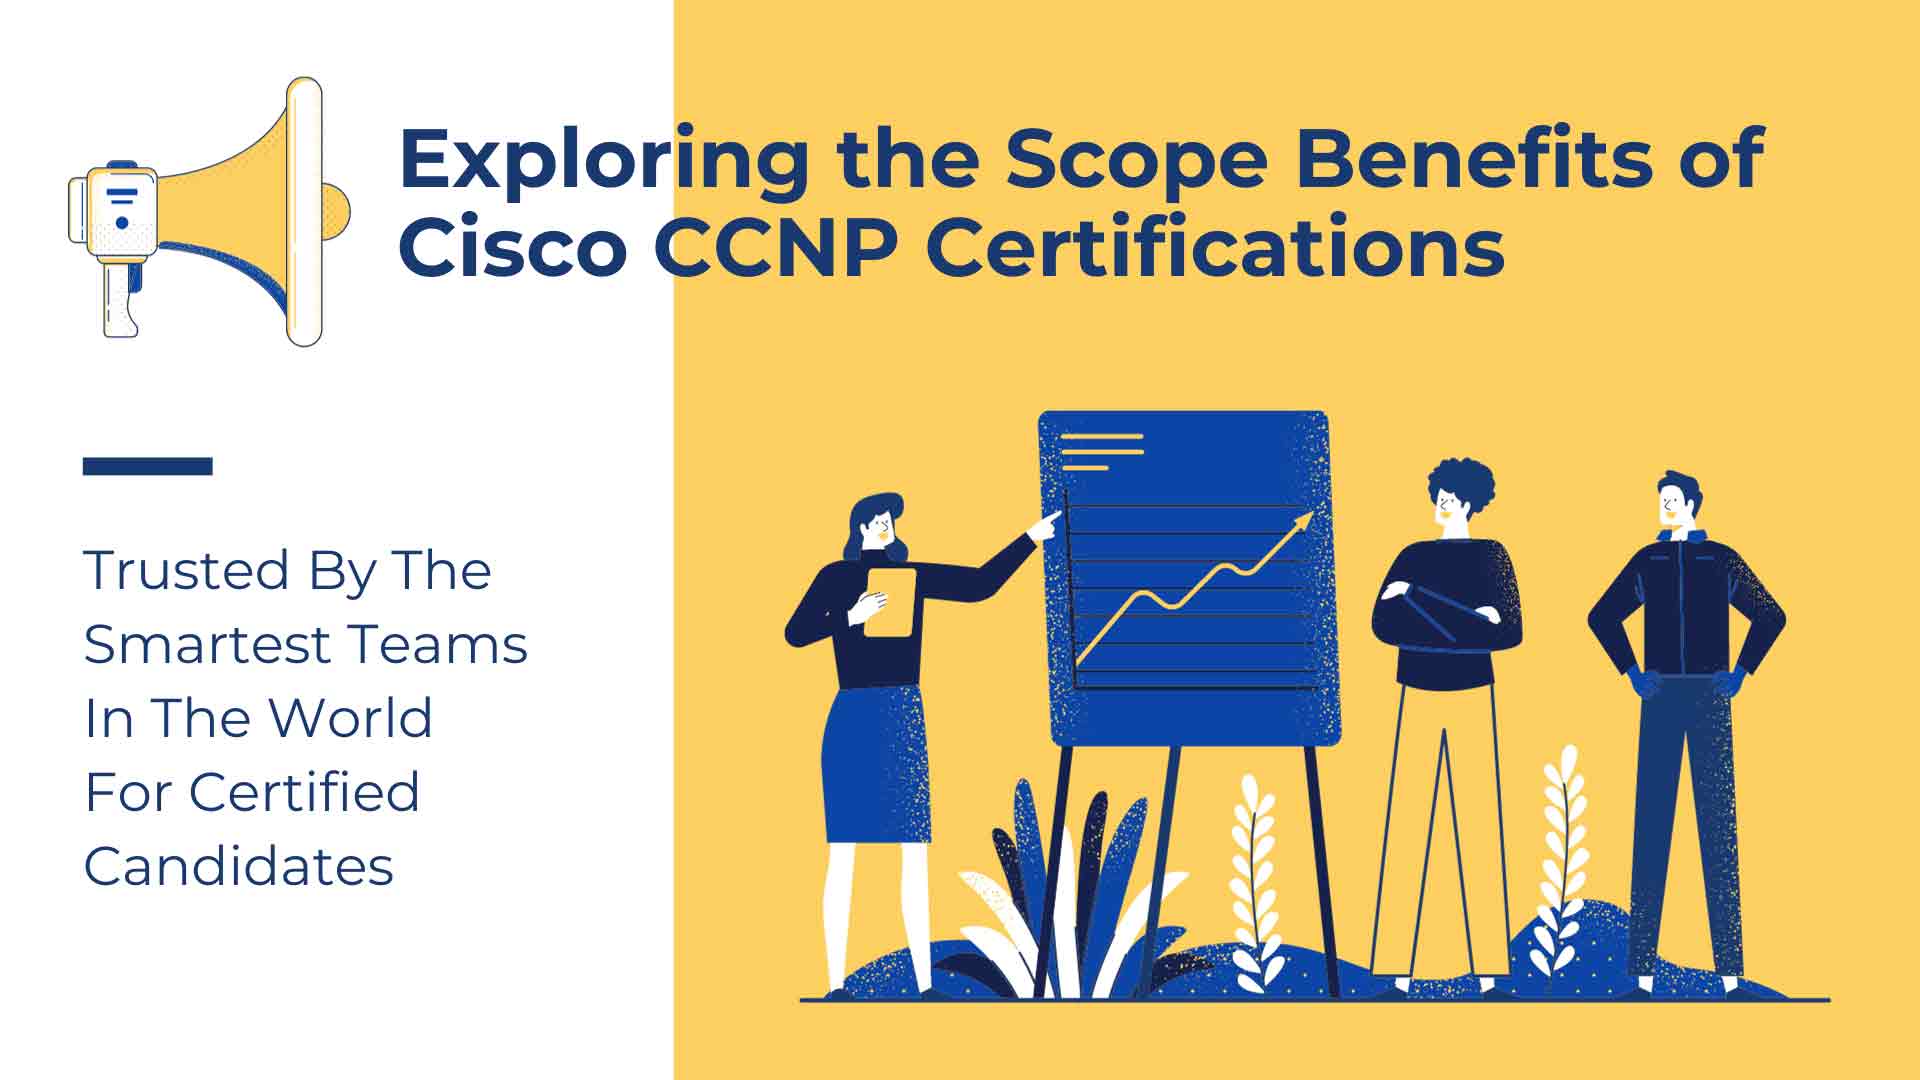 Exploring the Scope and Benefits of Cisco CCNP Certifications